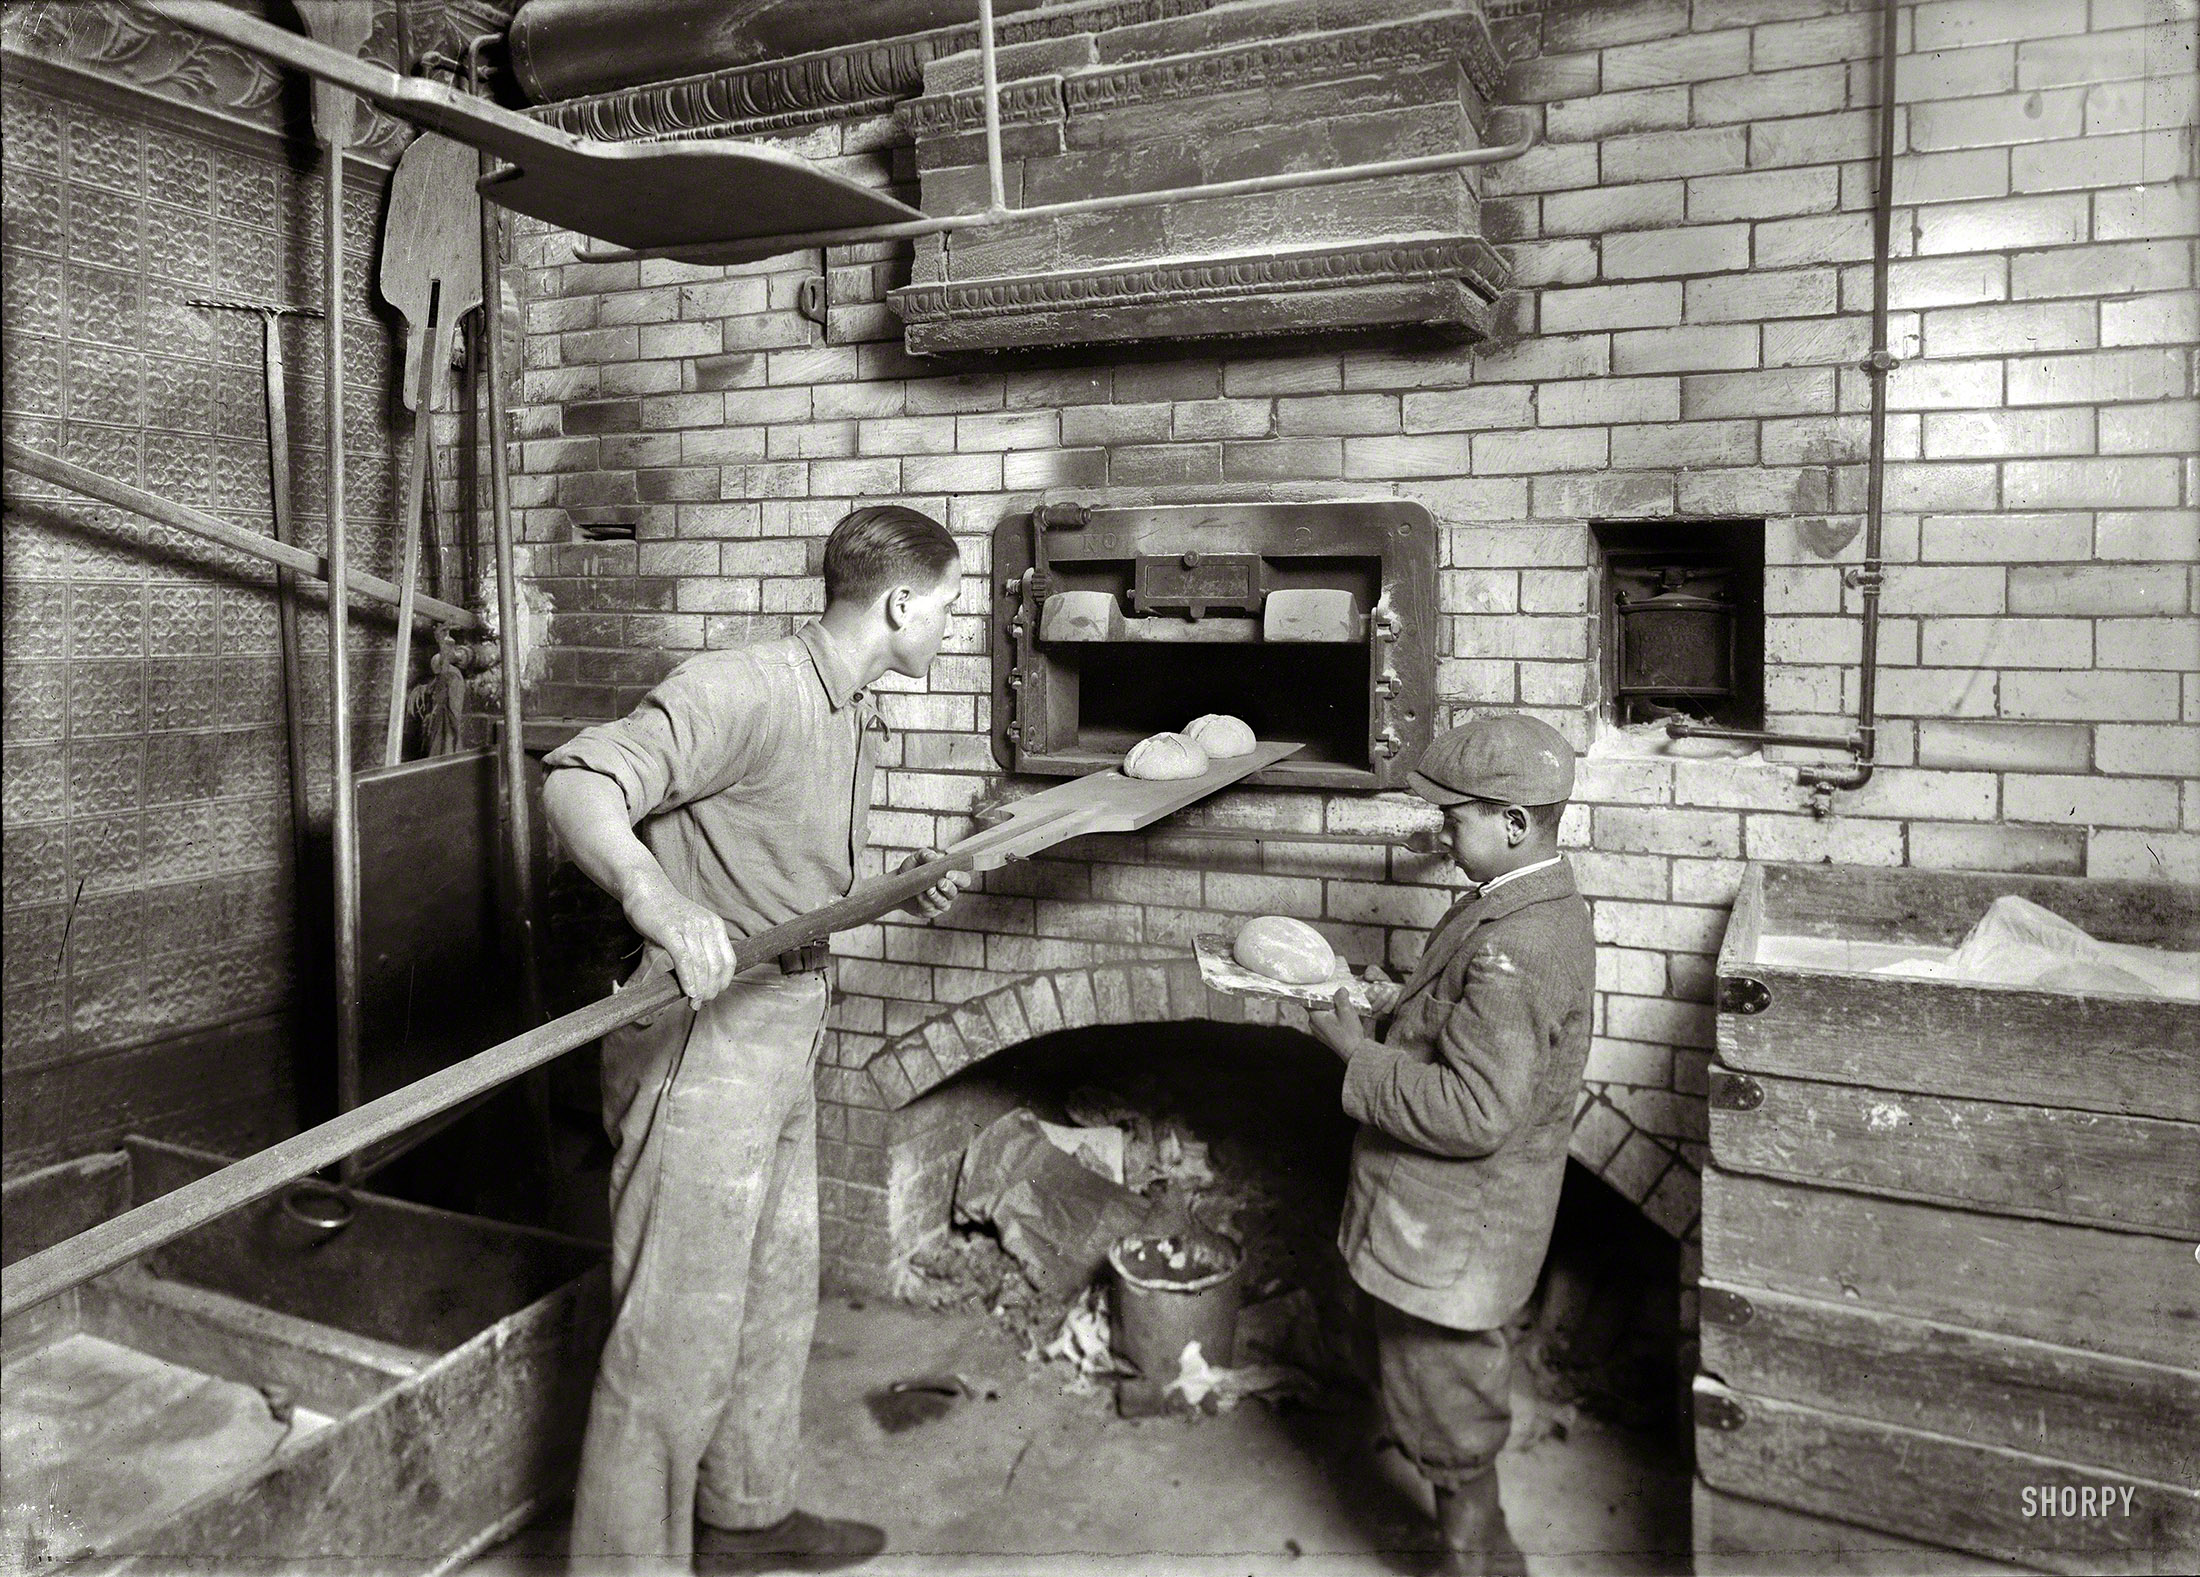 Feb. 1, 1917. Cambridge, Mass. "Vincenzo Messina, 15 years old and brother Angelo, 11, baking bread for father, 174 Salem Street. Vincenzo is working nights now, from 5 p.m. to 5 a.m. Usually works on day shift. Angelo helps a great deal, tends store and helps bake, too." Photo by Lewis Wickes Hine. View full size.